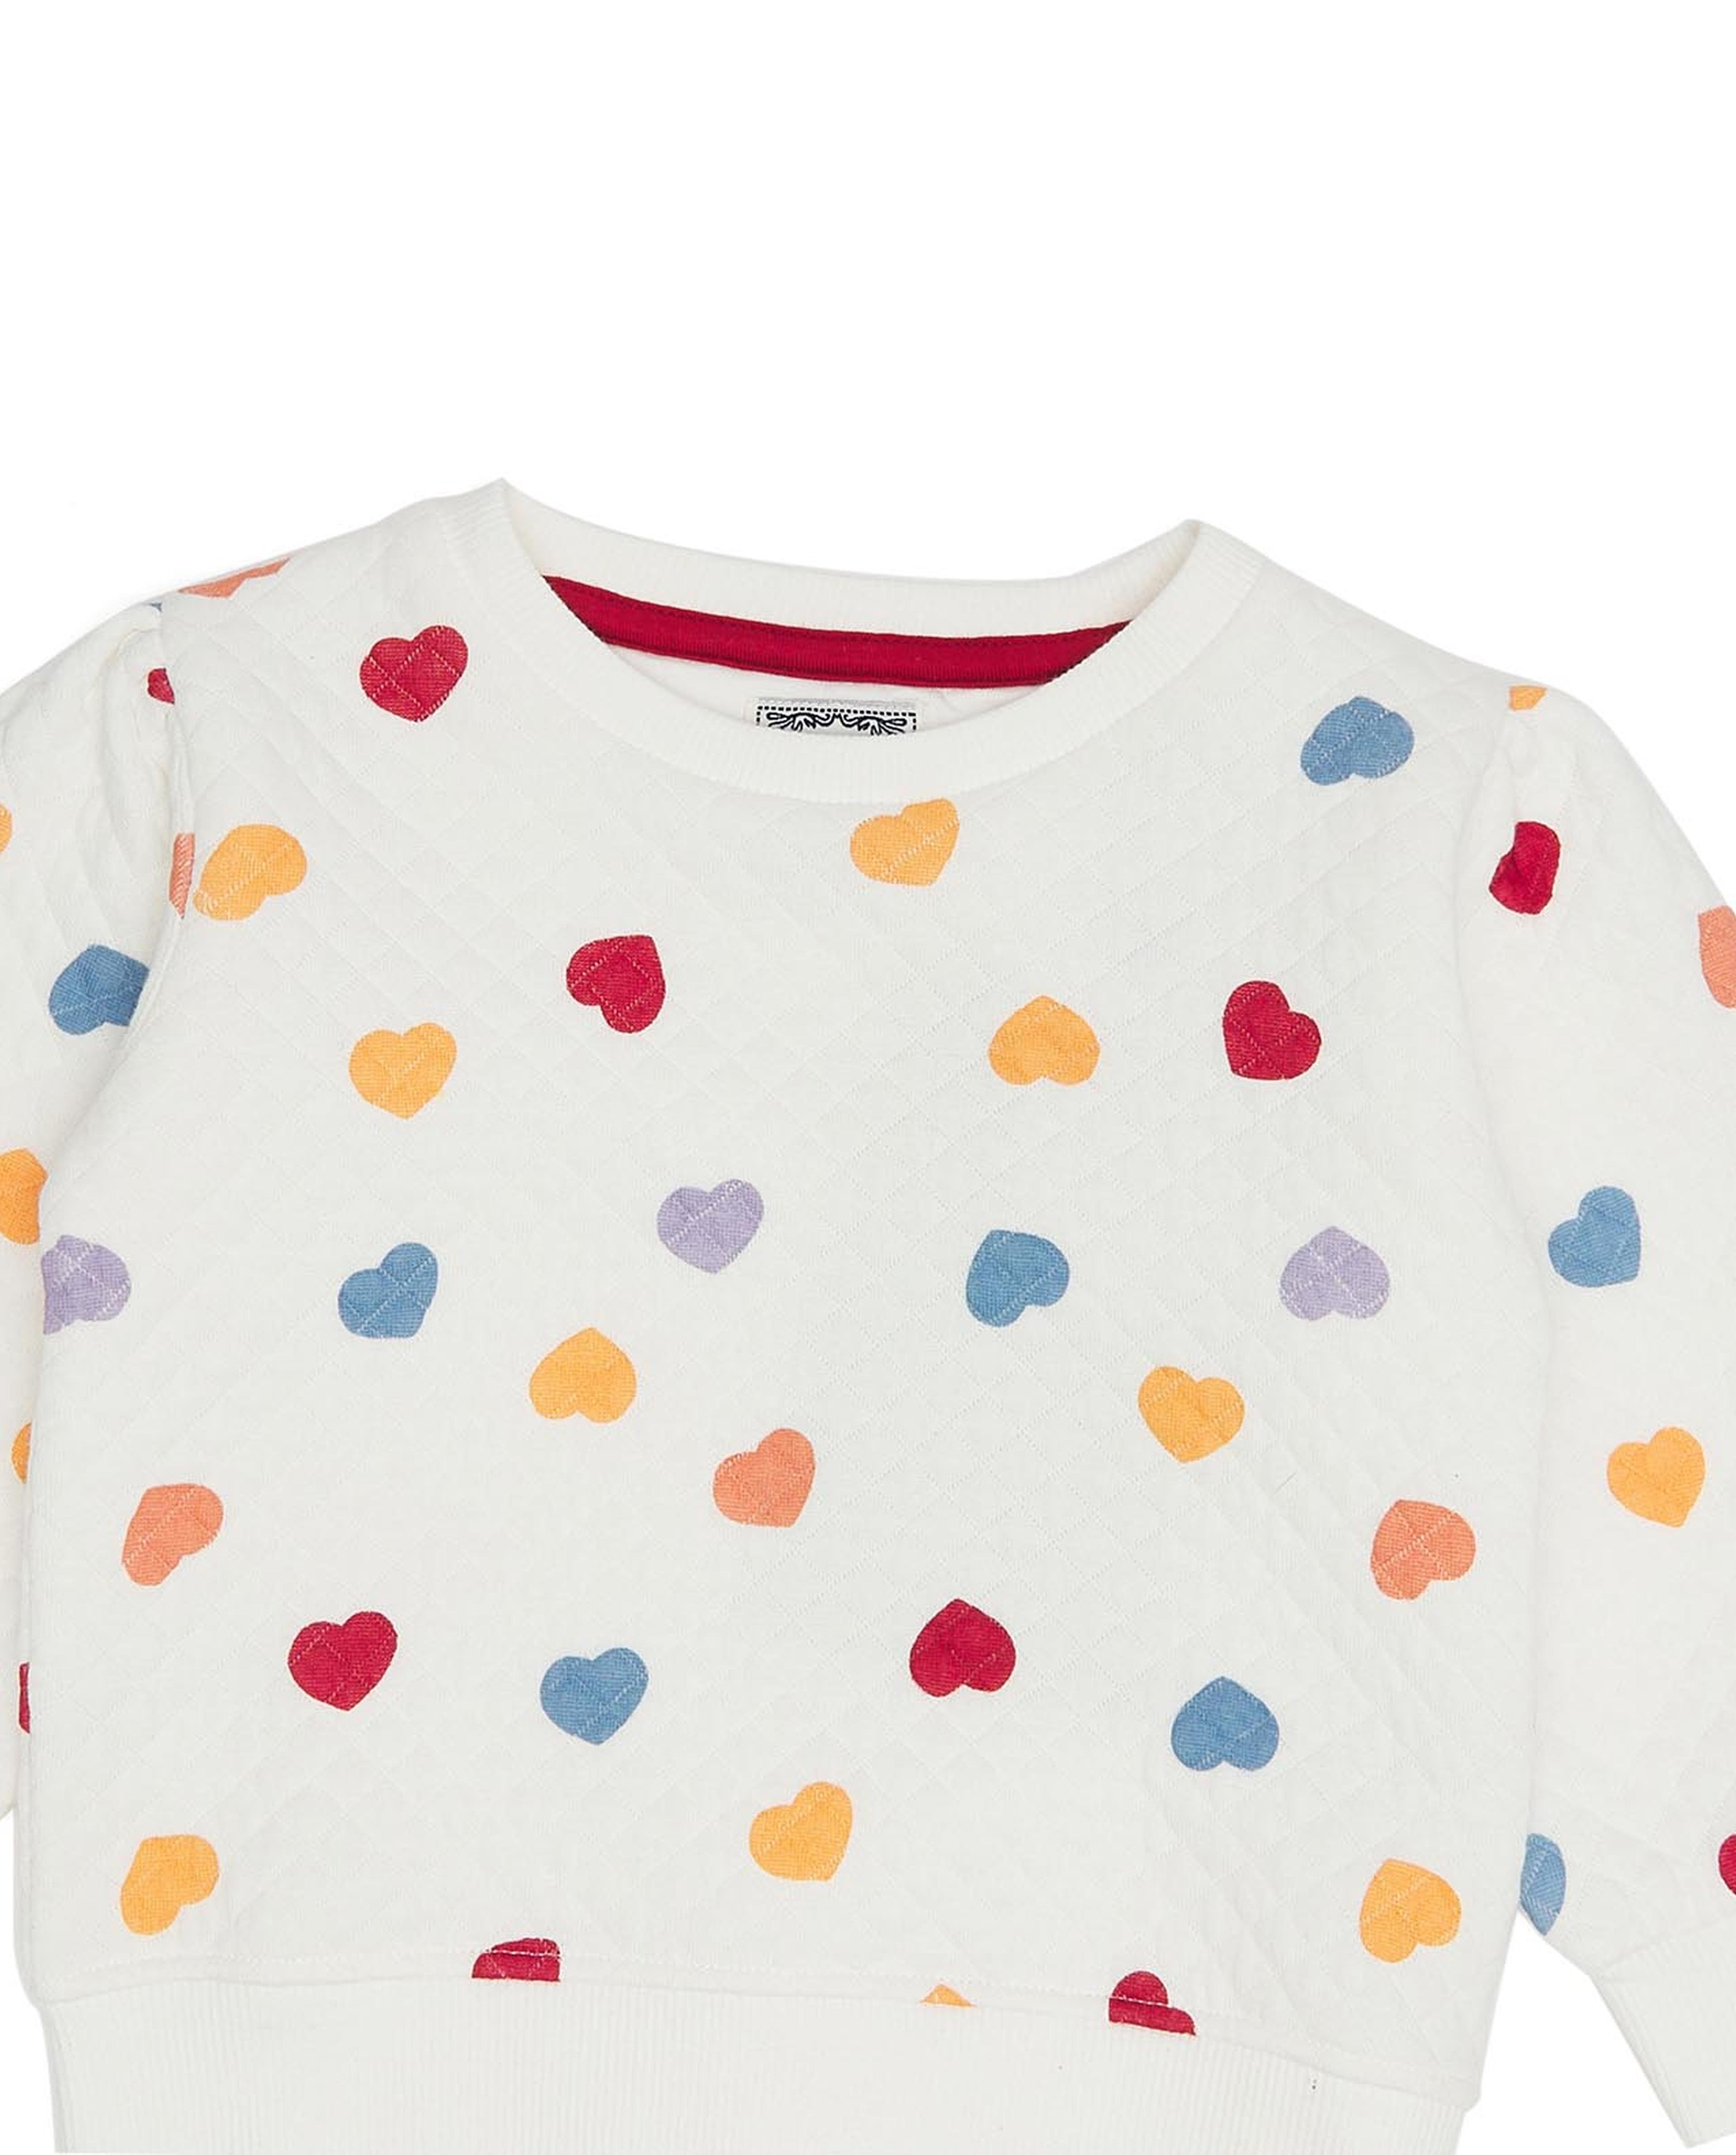 Heart patterned Sweatshirt with Crew Neck and Long Sleeves